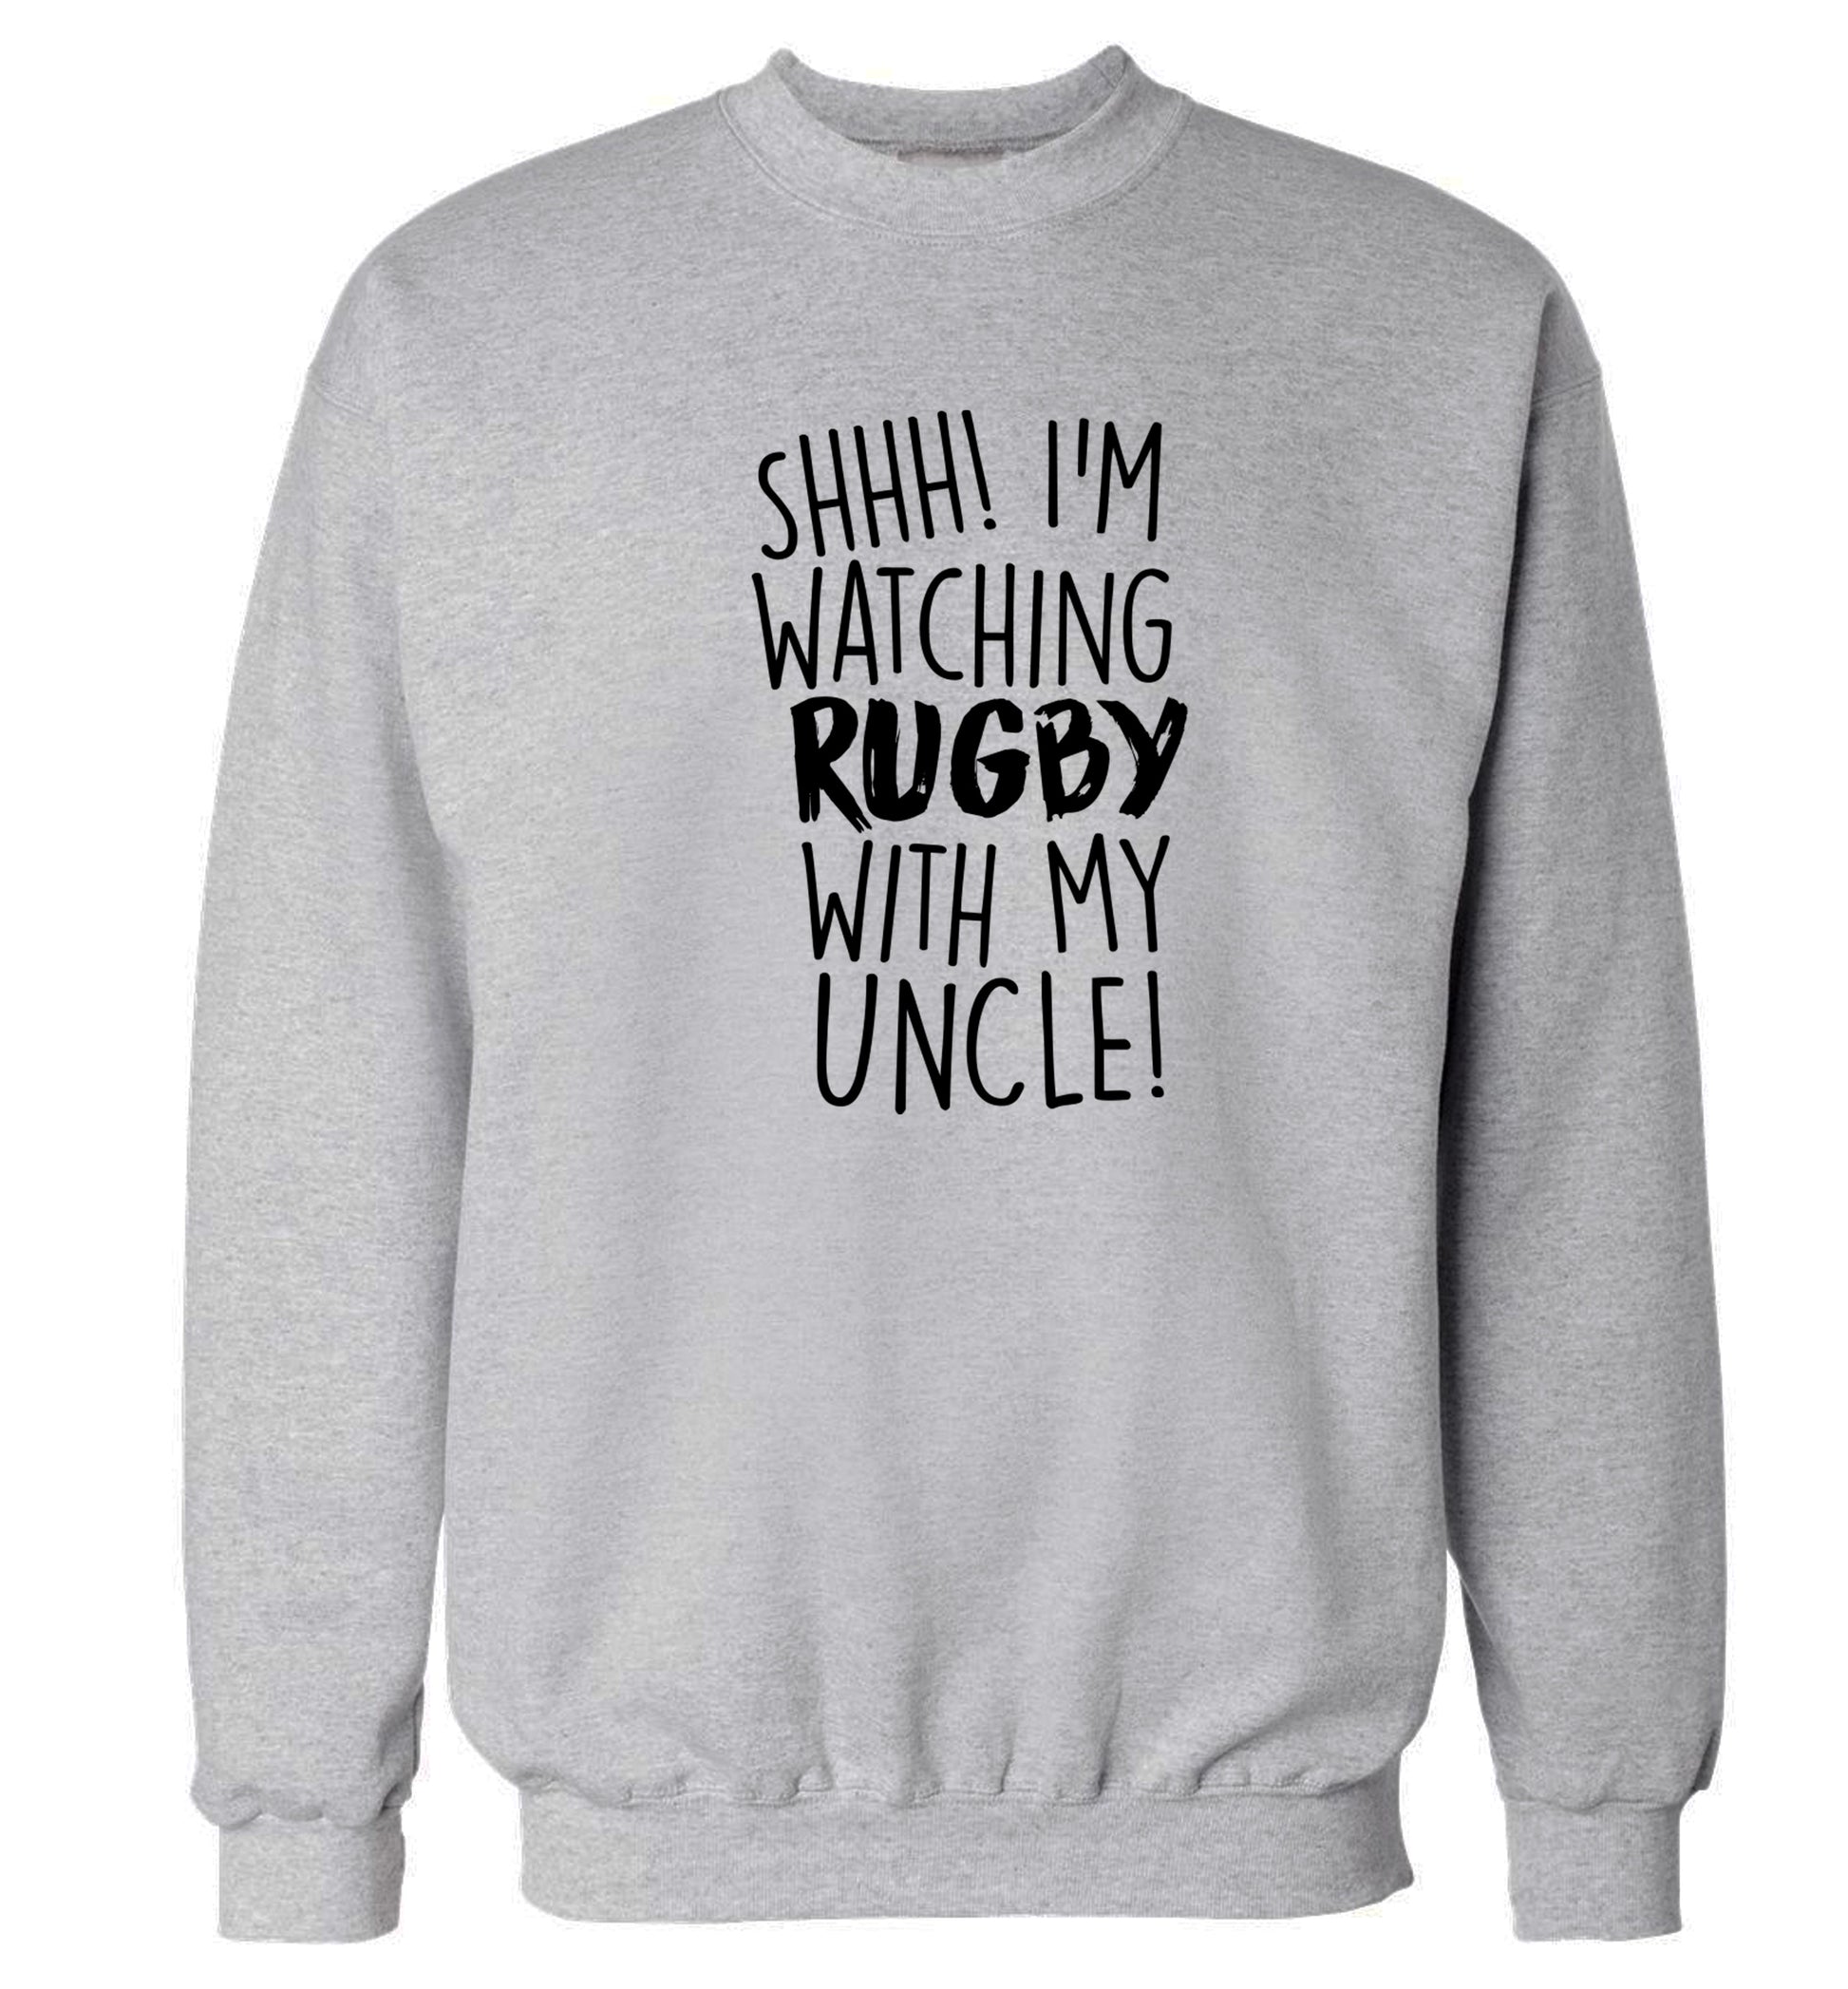 Shh.. I'm watching rugby with my uncle Adult's unisex grey Sweater 2XL